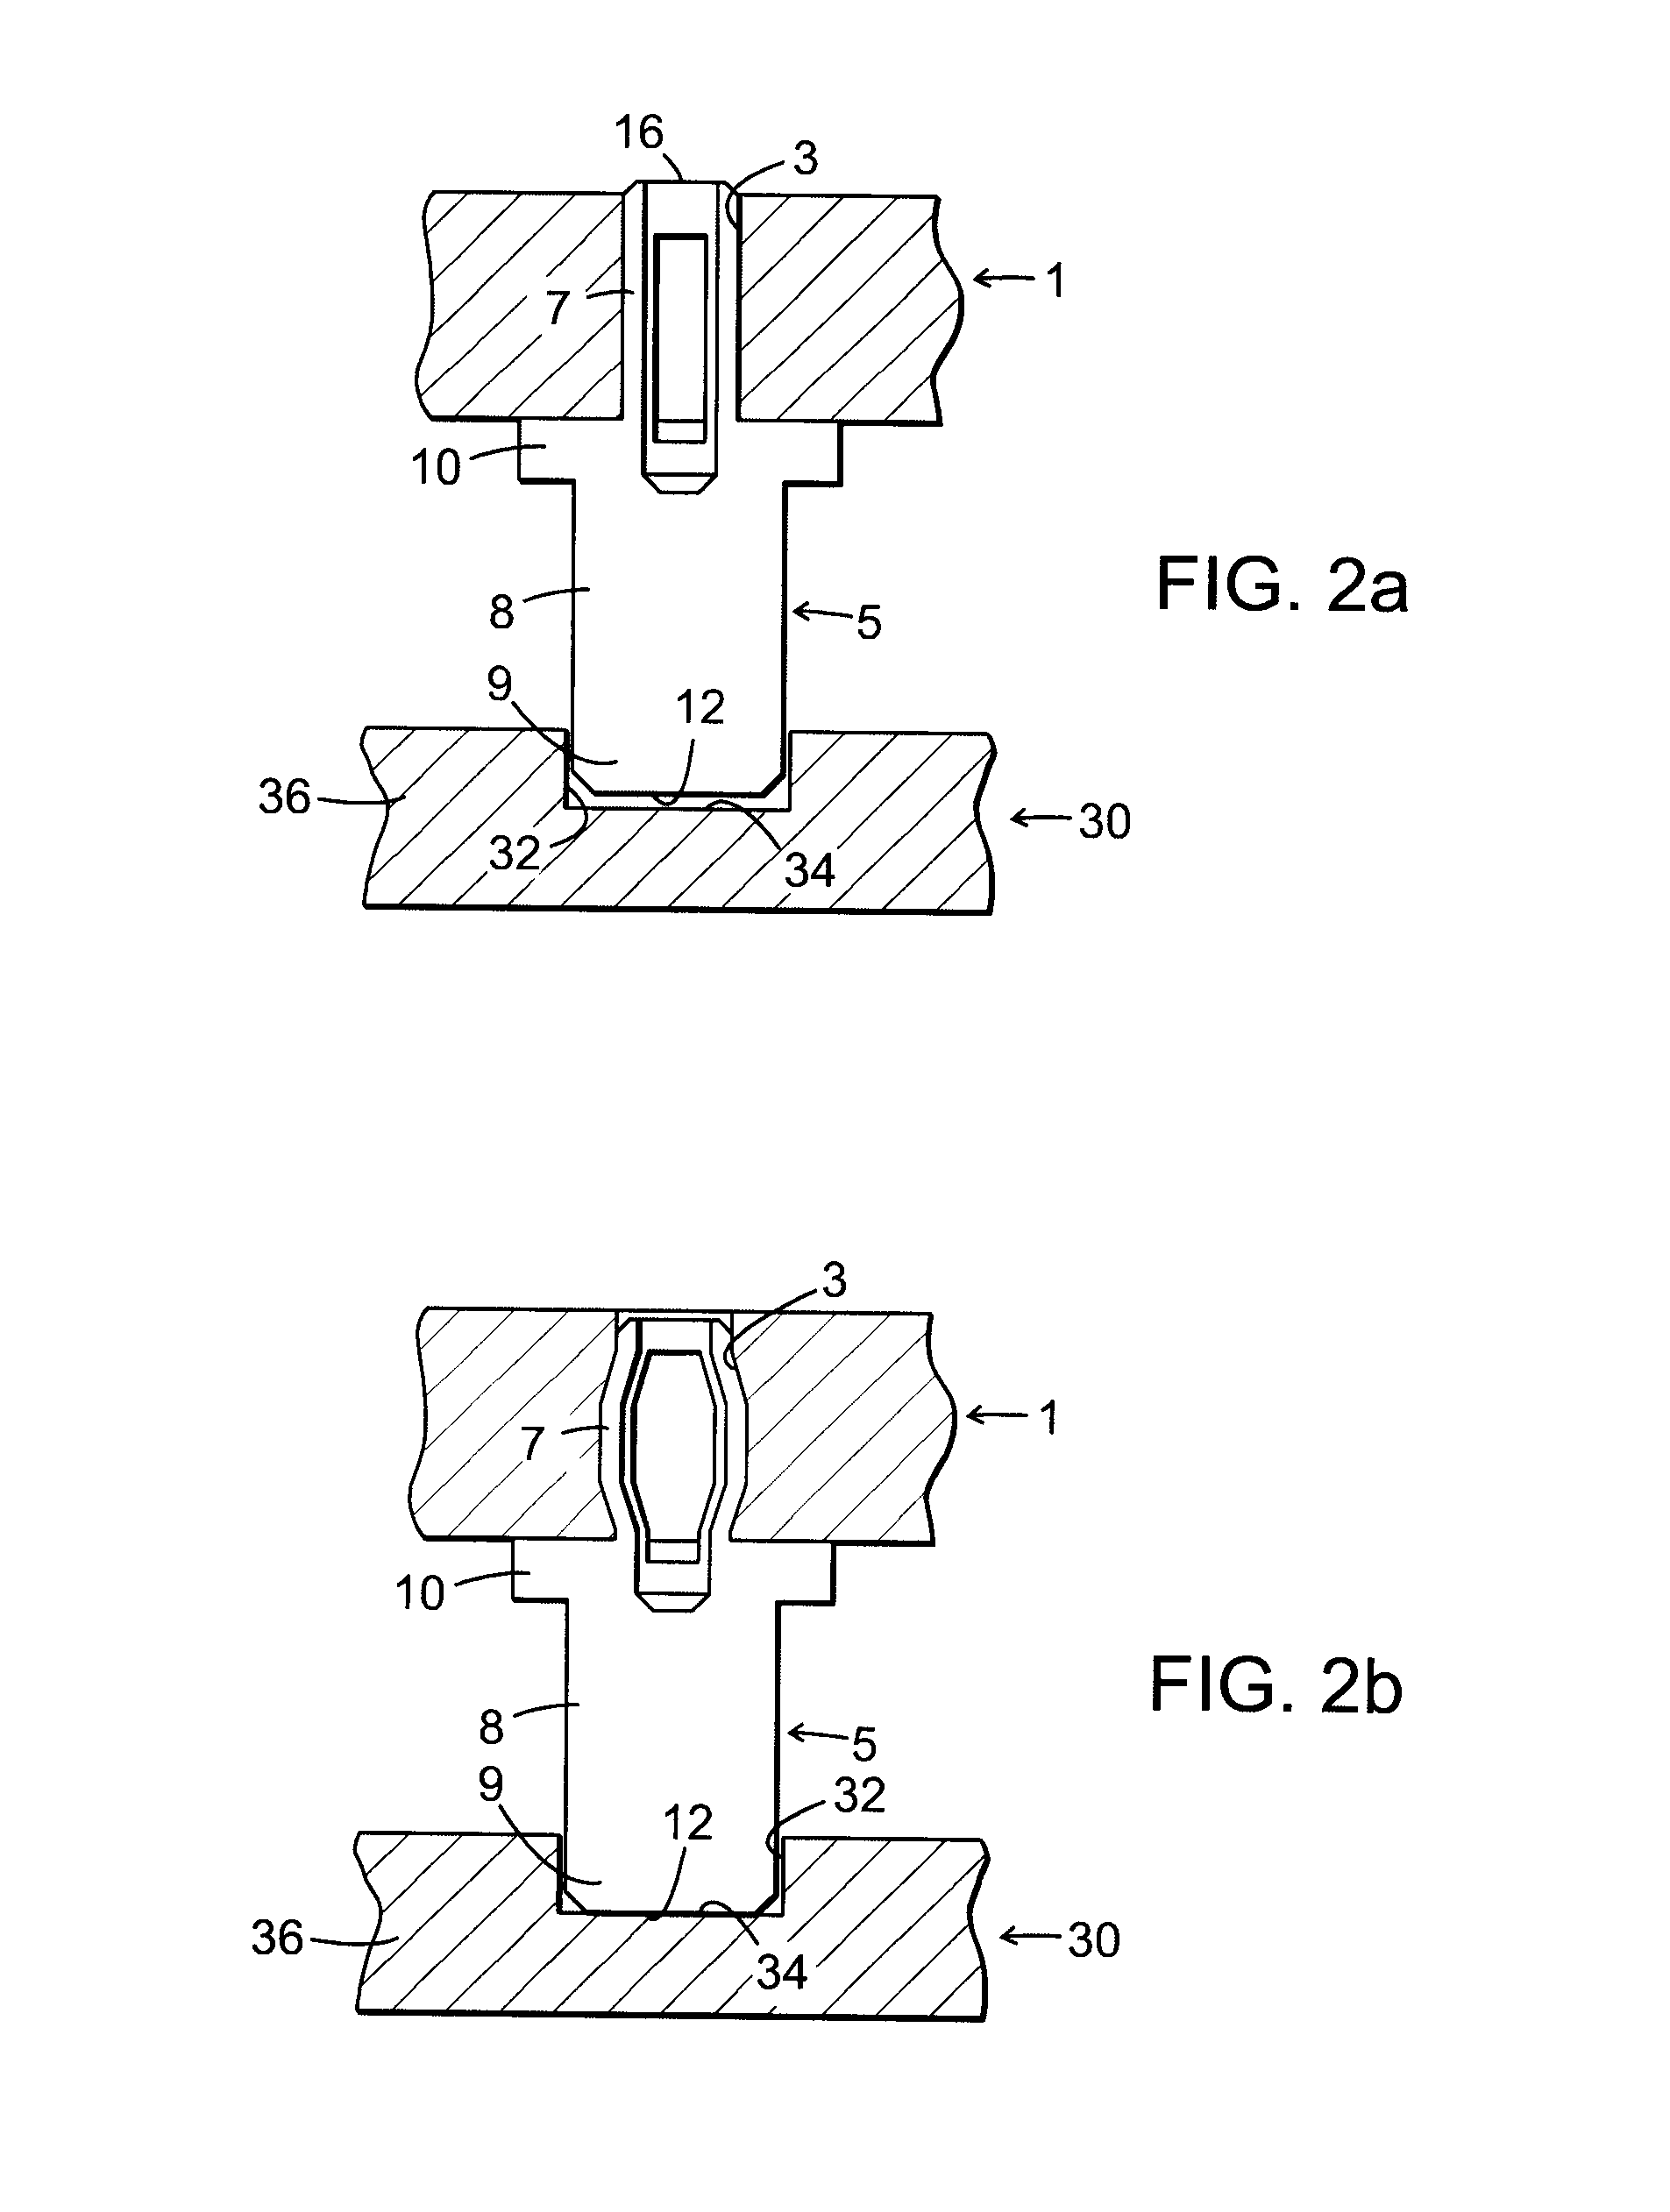 Method for mounting connection pins in a component carrier, a die tool for mounting connection pins, a component carrier forming a module for an electronic assembly, and such an assembly